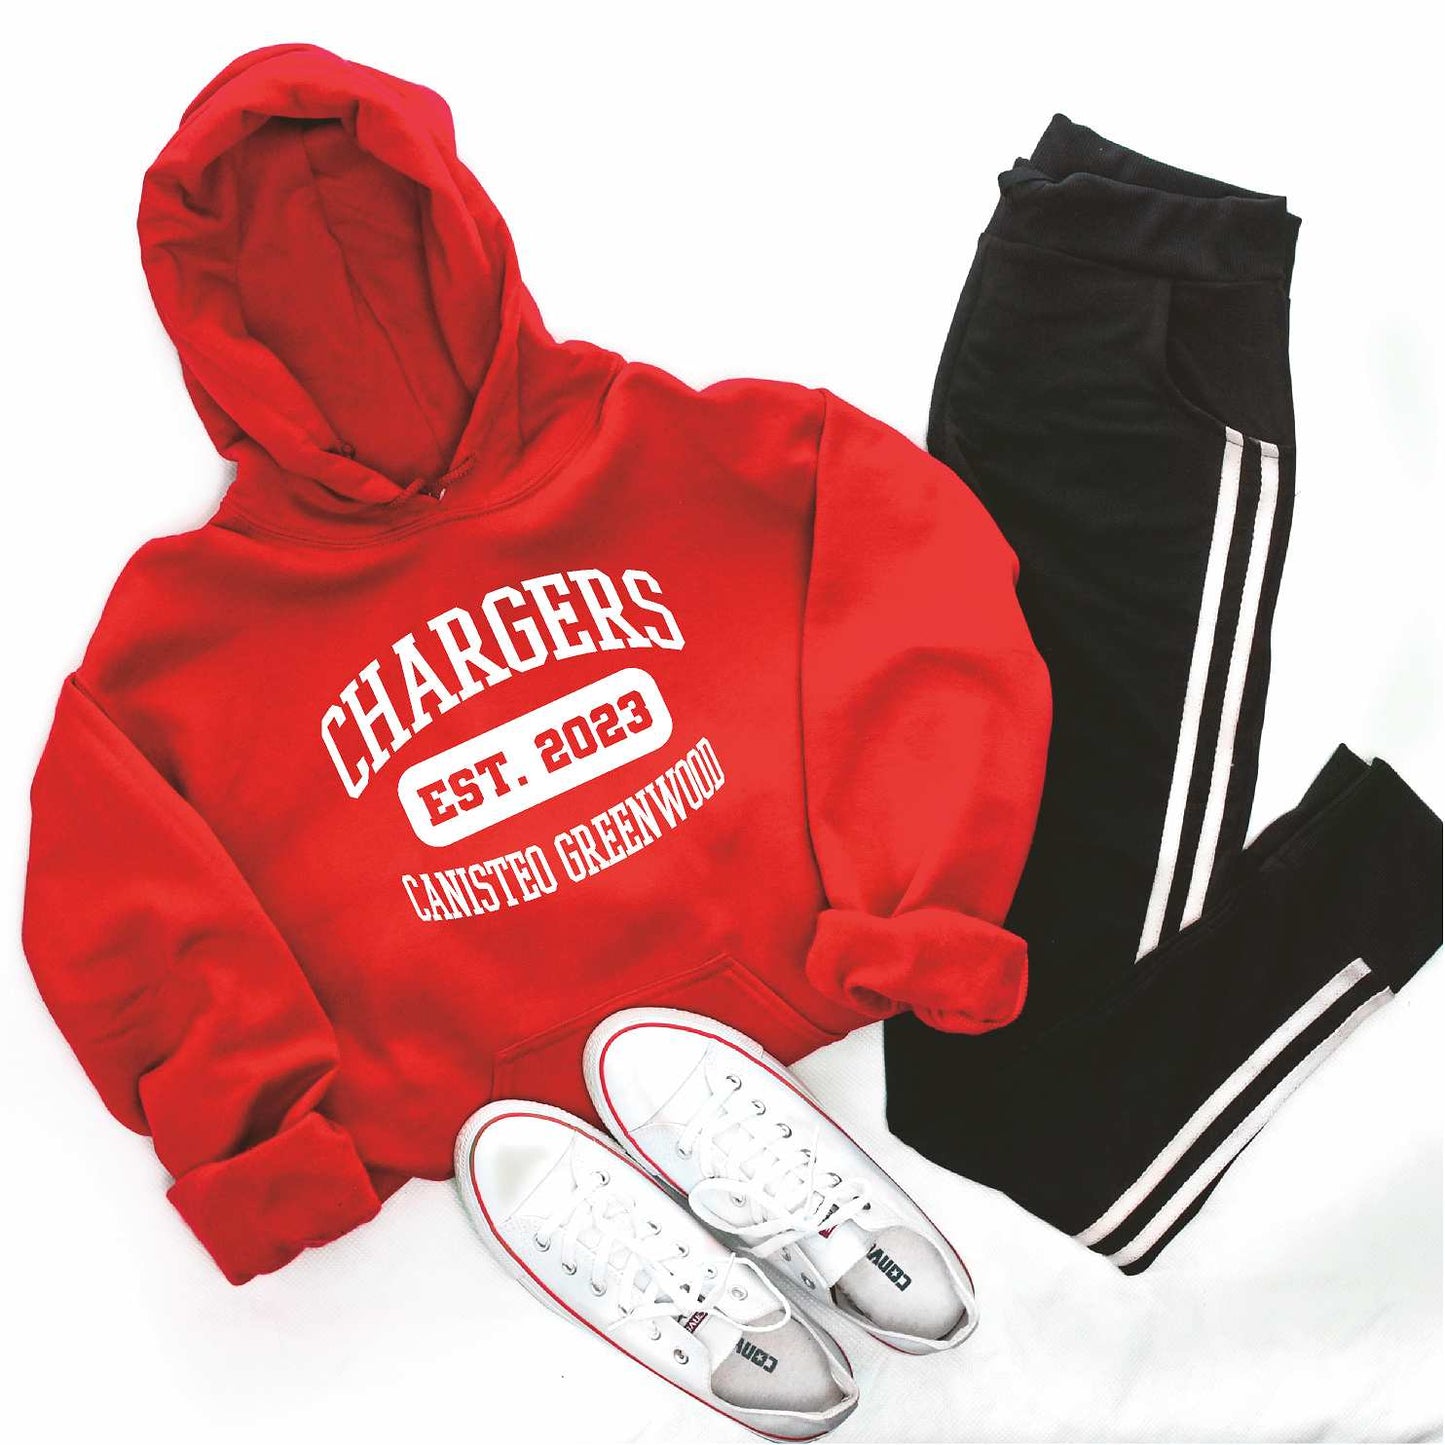 CG Chargers Est Hoodie, Gildan 18500 Unisex, Youth and Adult